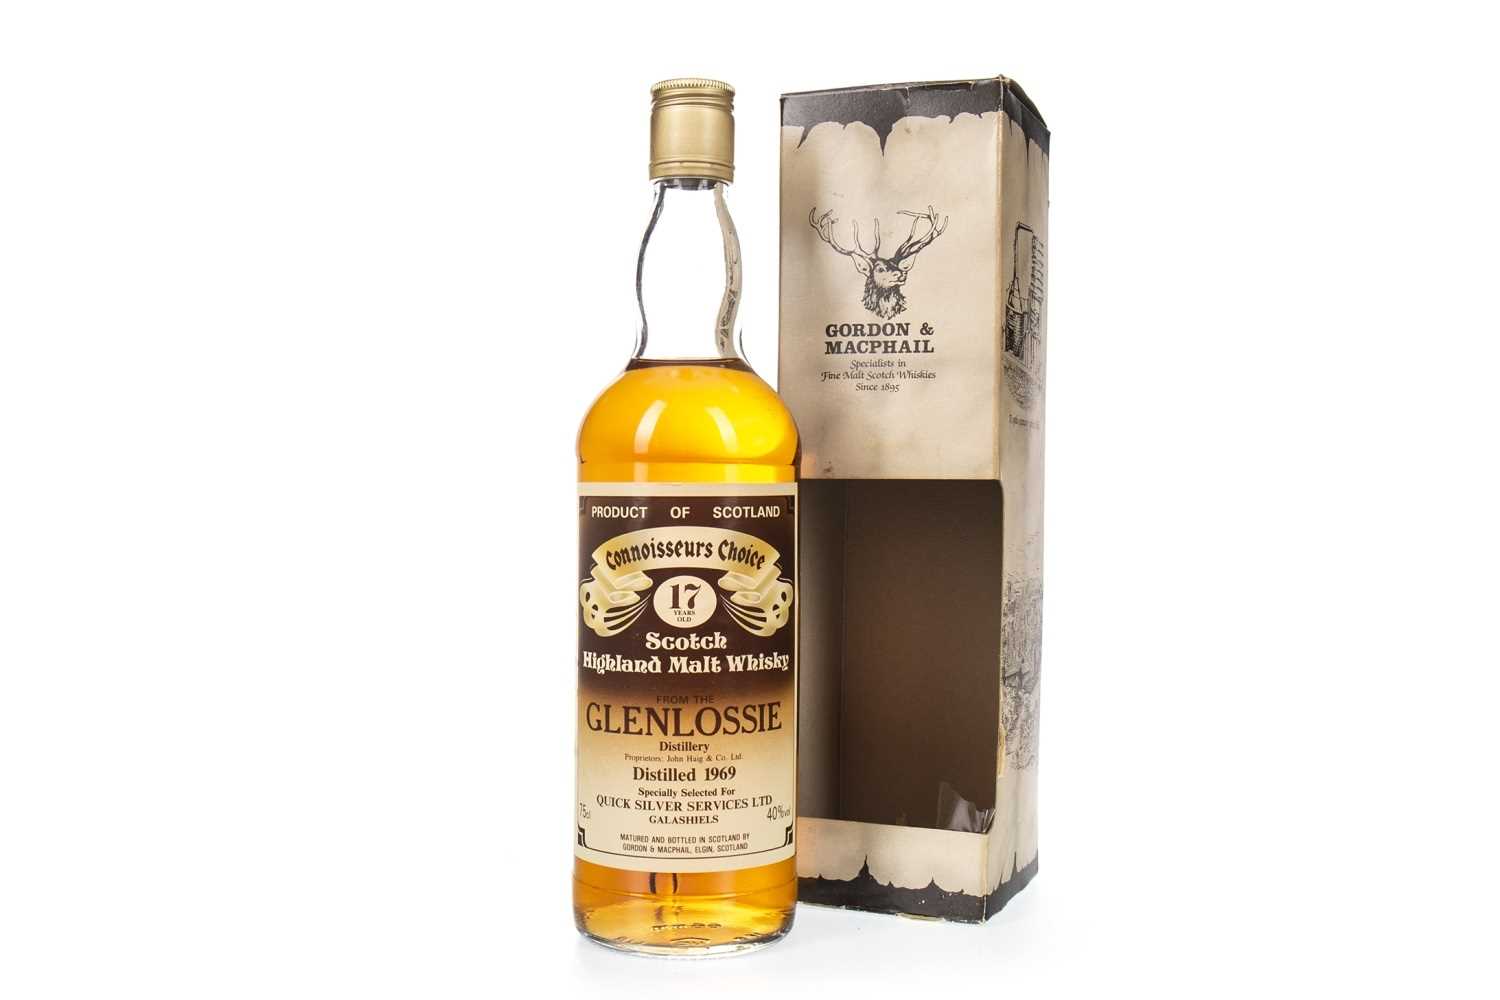 Lot 28 - GLENLOSSIE 1969 CONNOISSEURS CHOICE 17 YEARS OLD